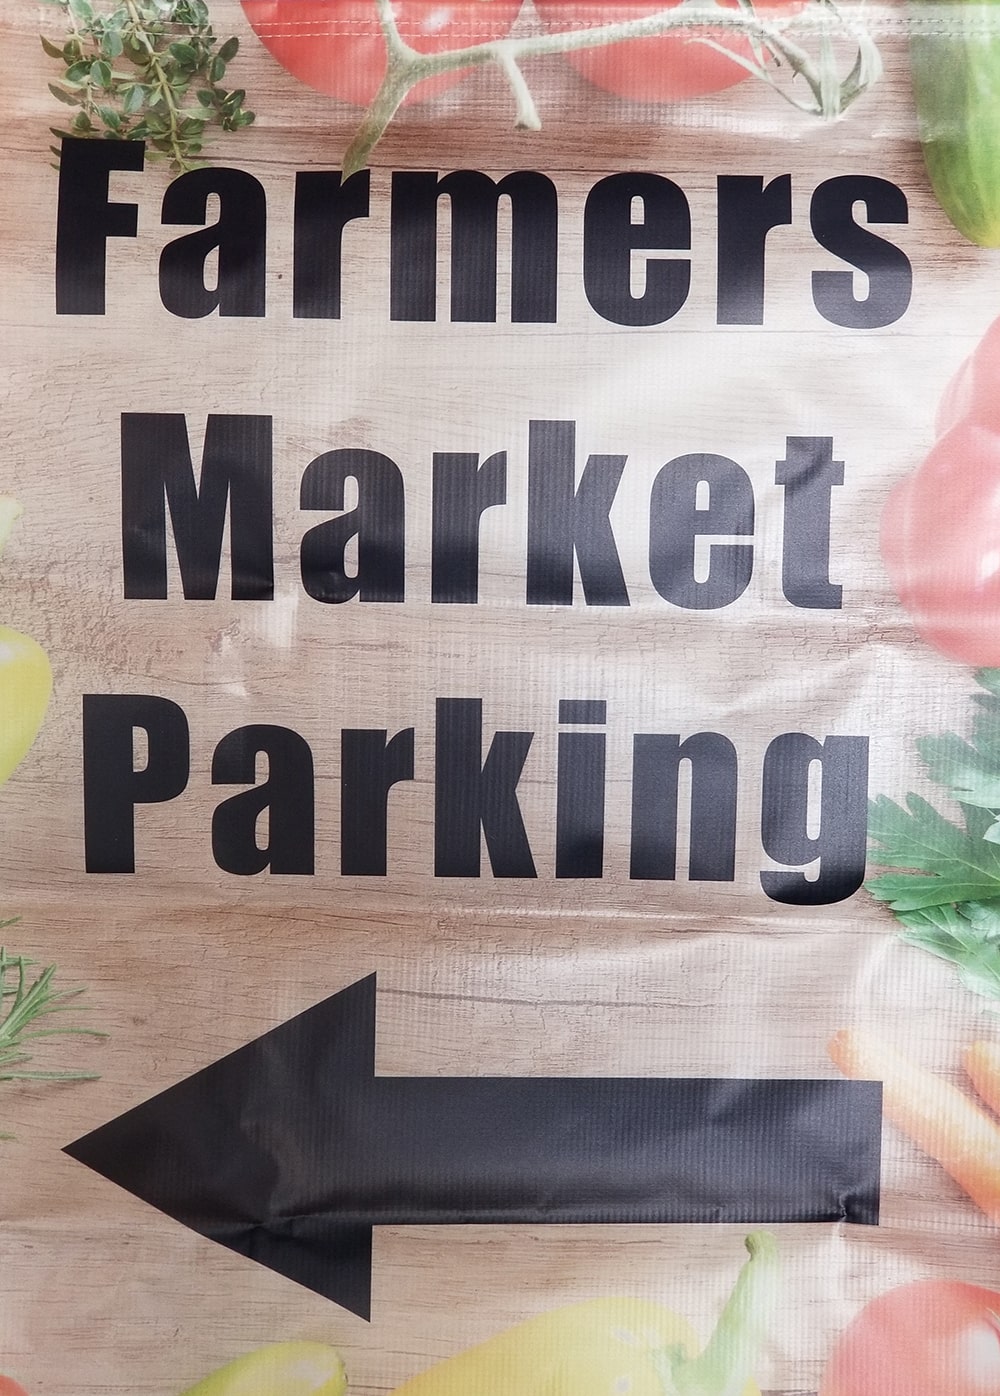 Farmers Market Parking sign with arrow pointing left